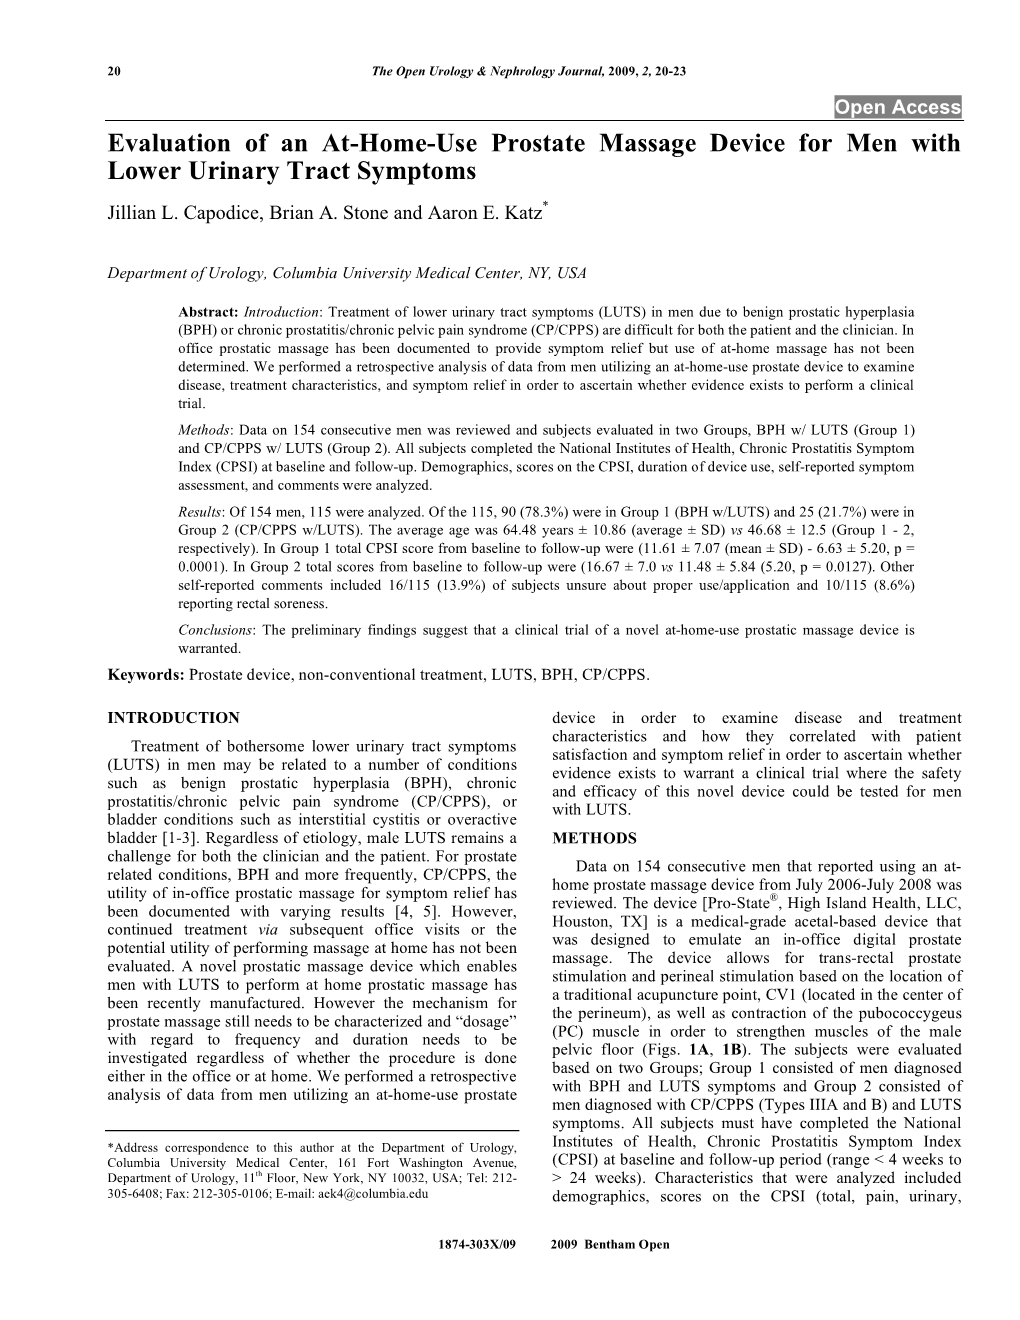 Evaluation of an At-Home-Use Prostate Massage Device for Men with Lower Urinary Tract Symptoms Jillian L